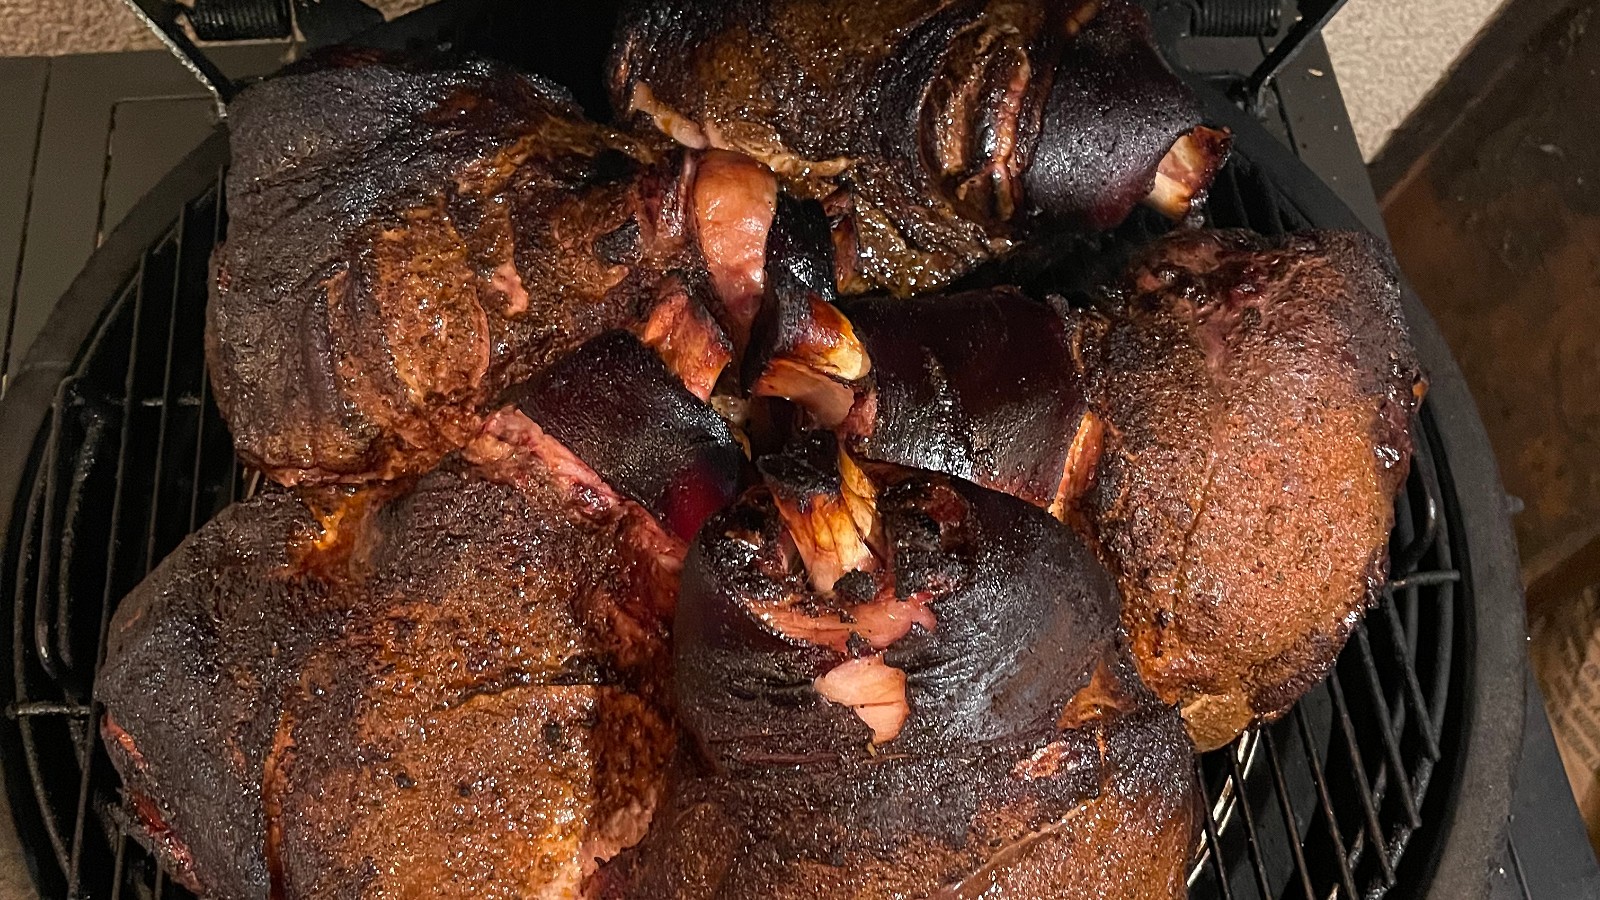 Image of Let’s talk about Pork Butts